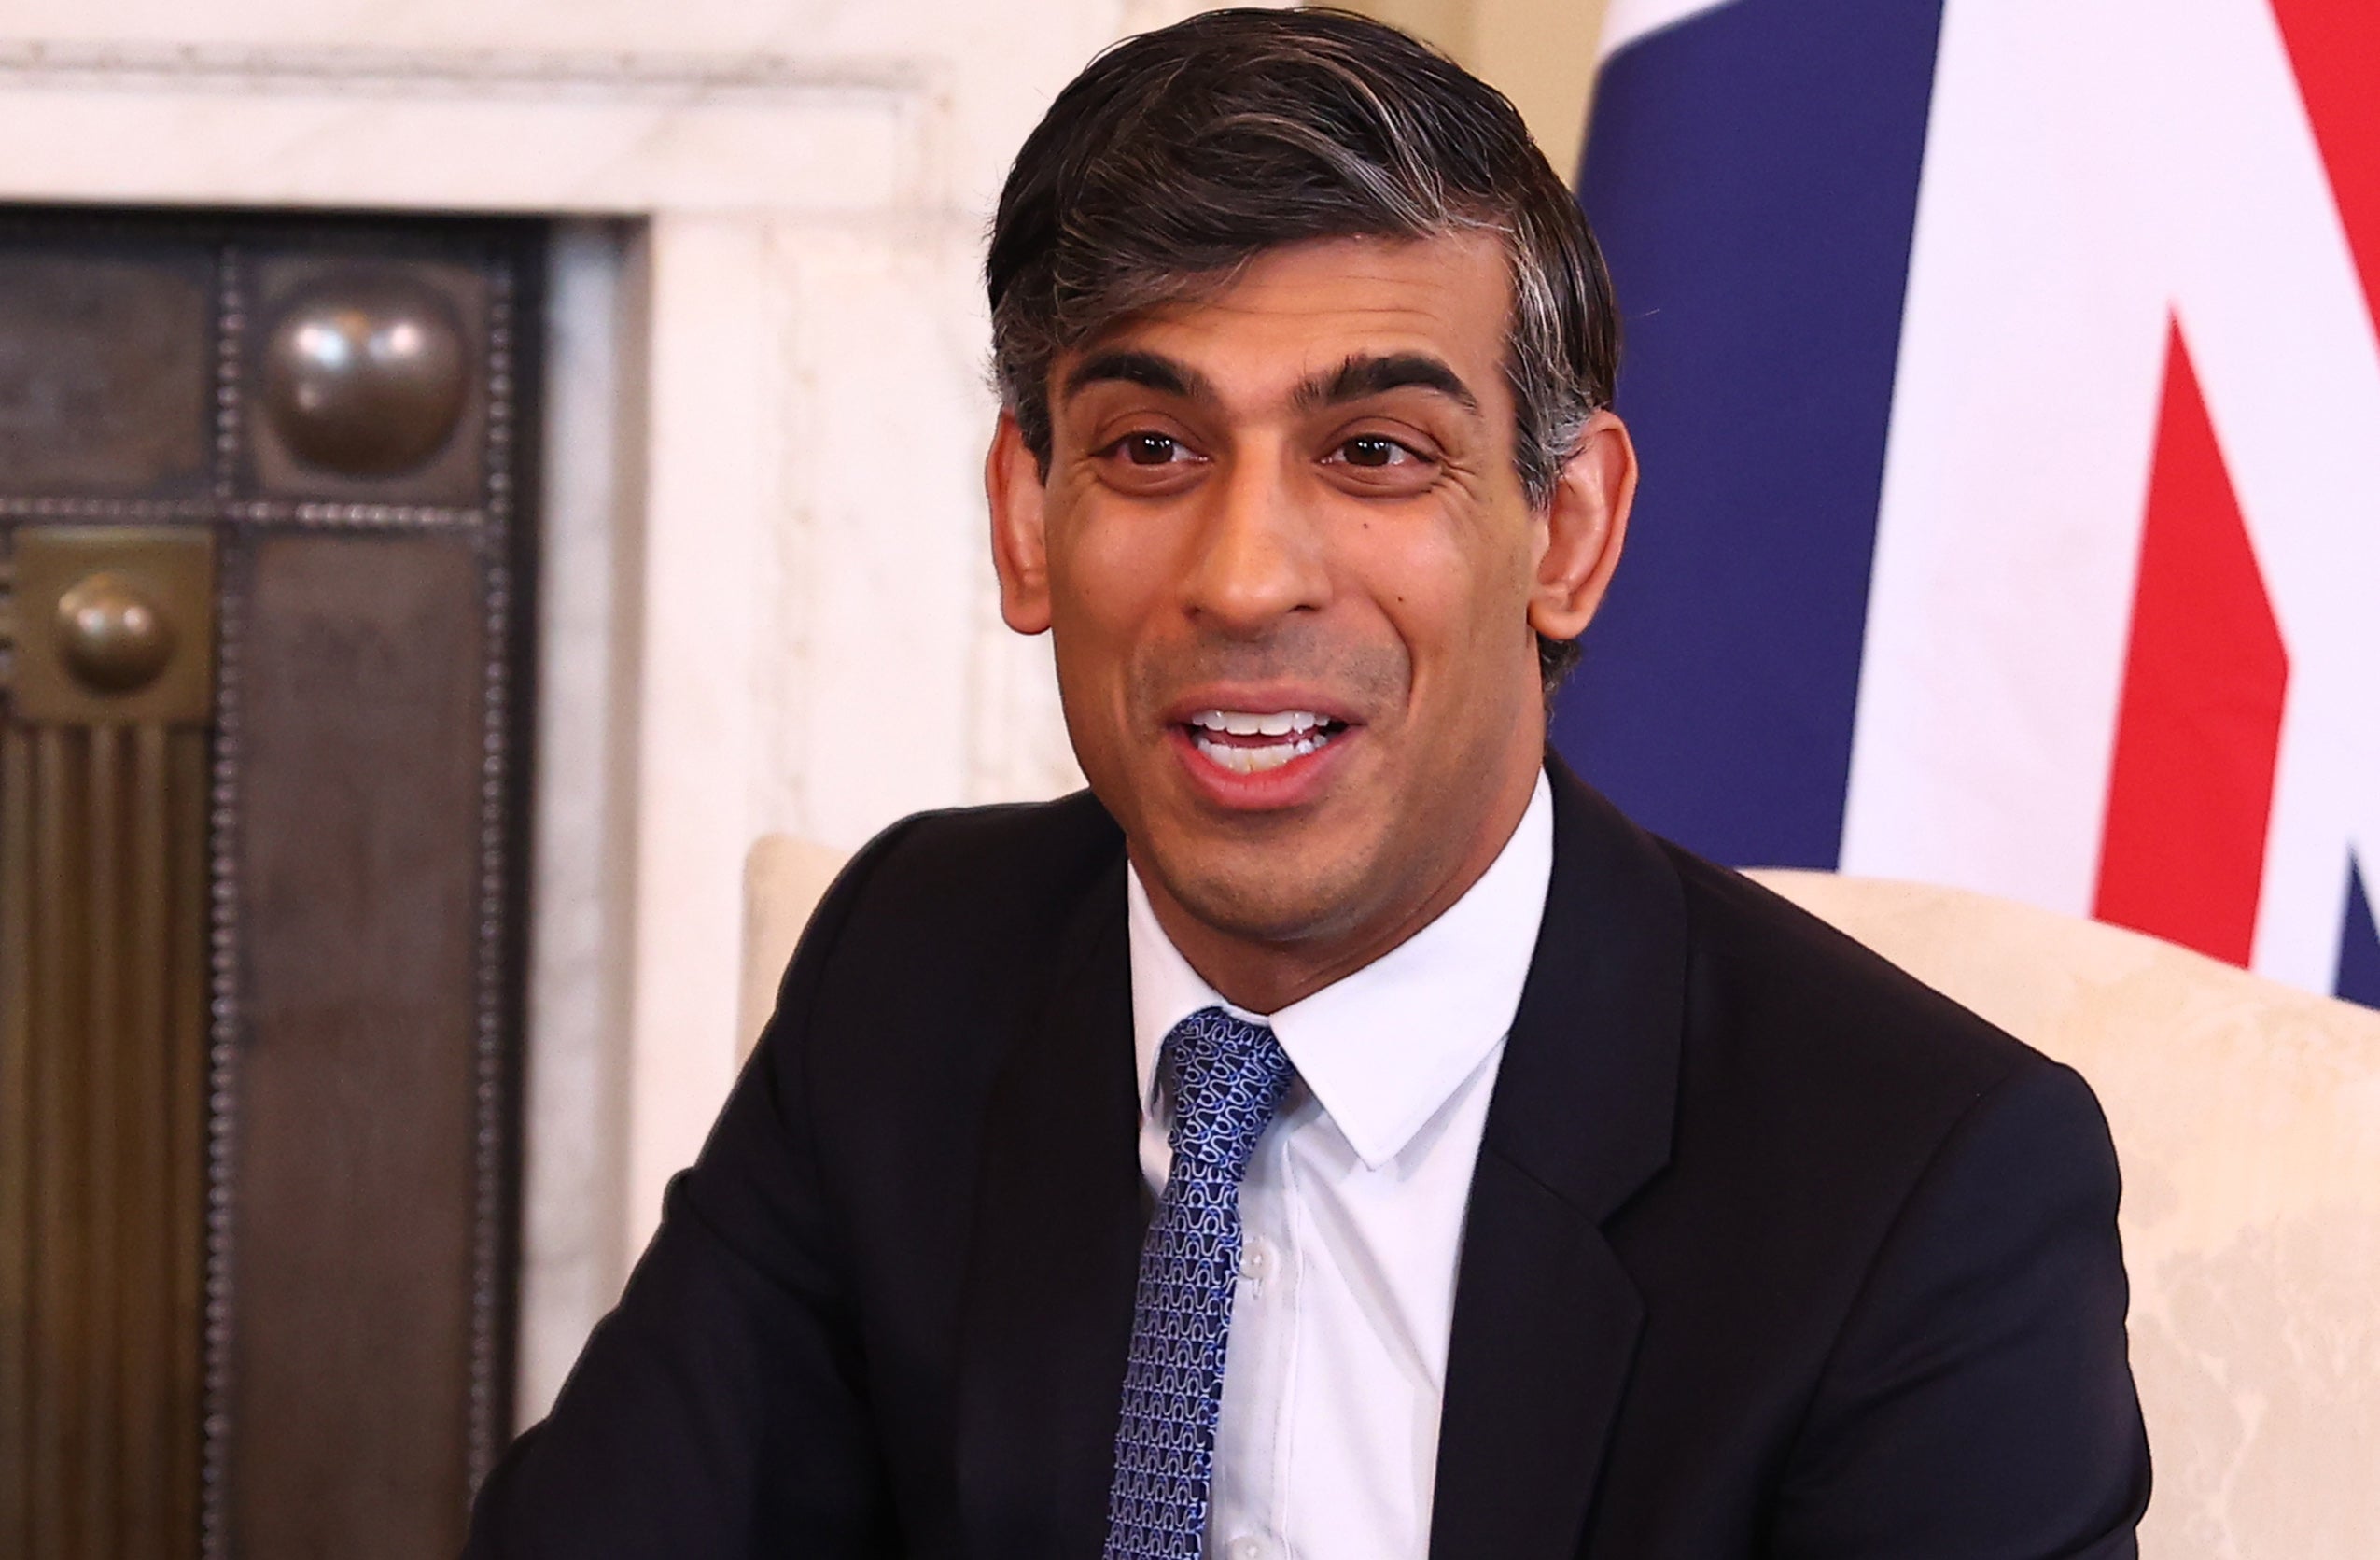 Transport secretary Mark Harper said the Conservatives do not have a race problem, citing Rishi Sunak as the first British Asian prime minister